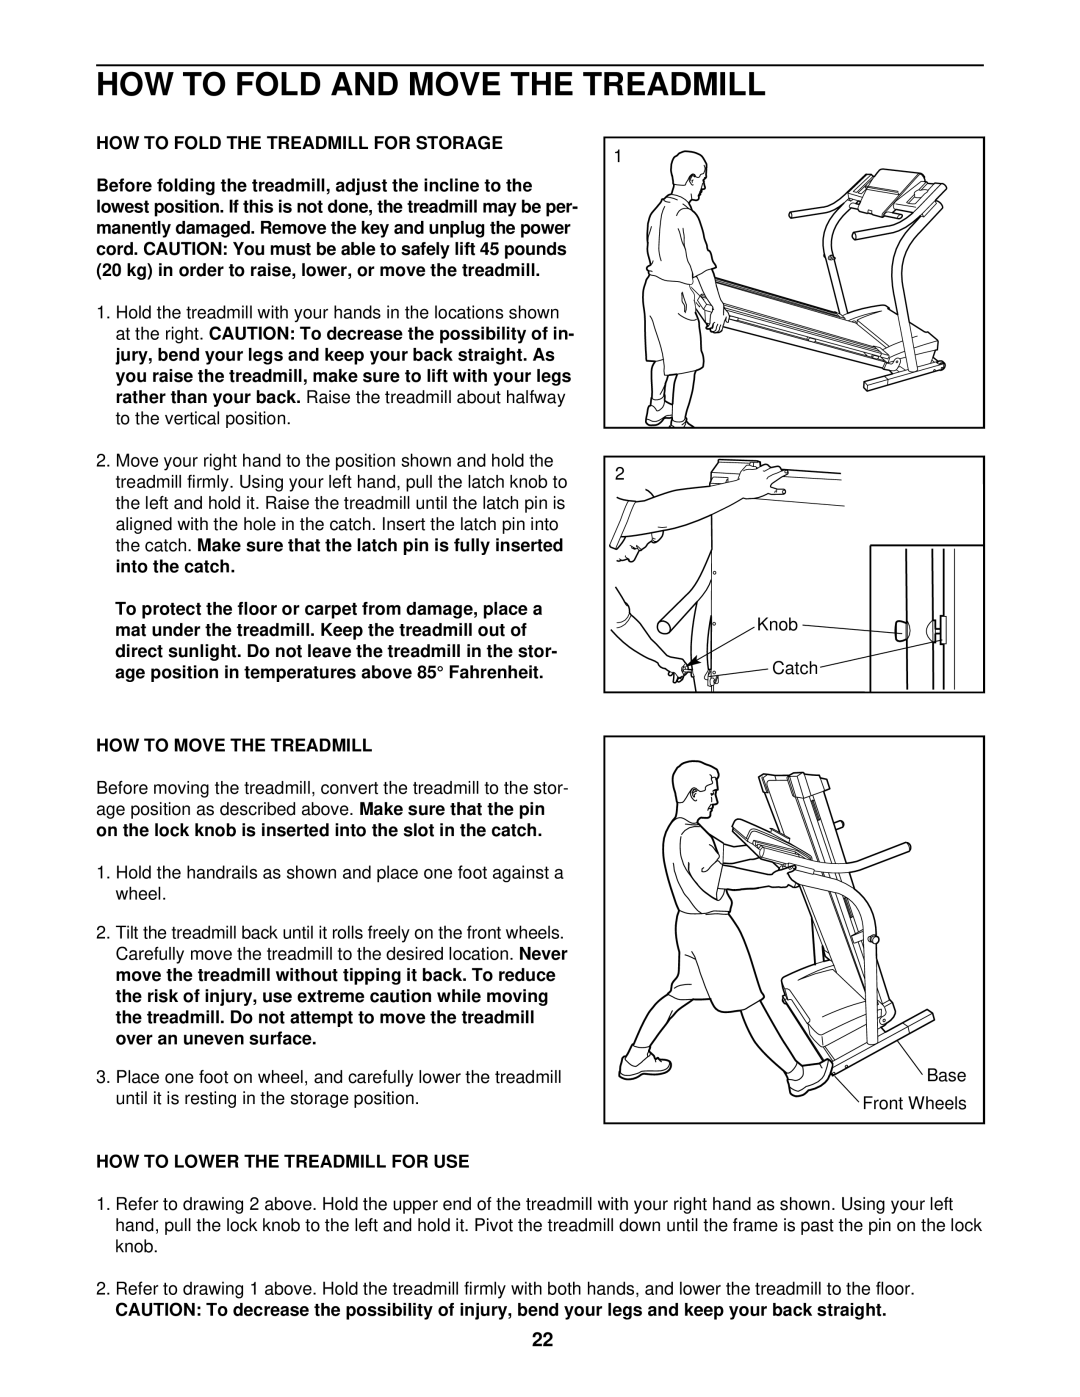 NordicTrack NTTL09610 How To Fold And Move The Treadmill, How To Fold The Treadmill For Storage, How To Move The Treadmill 